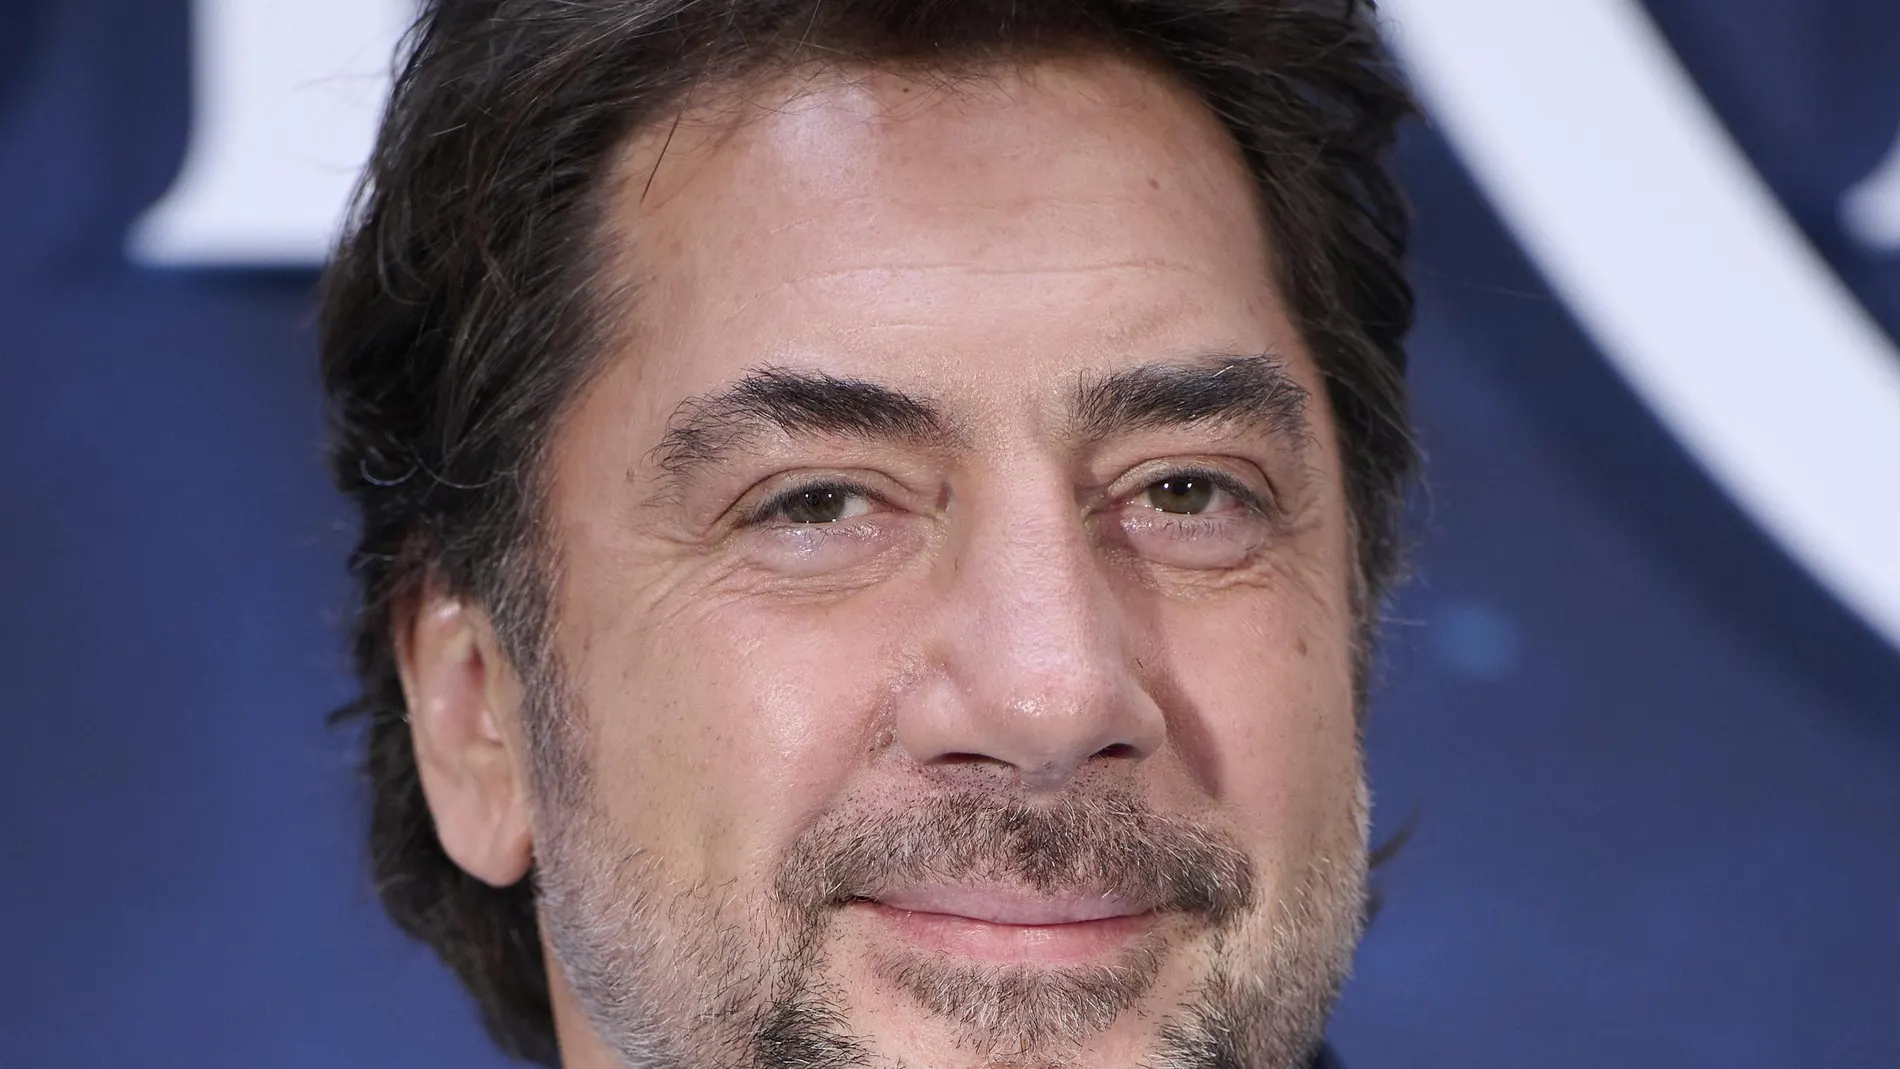 MADRID, SPAIN - MAY 18: Actor Javier Bardem attends the photocall of "La Sirenita" by Disney at the Four Seasons Hotel on  May 18, 2023 in Madrid, Spain. 